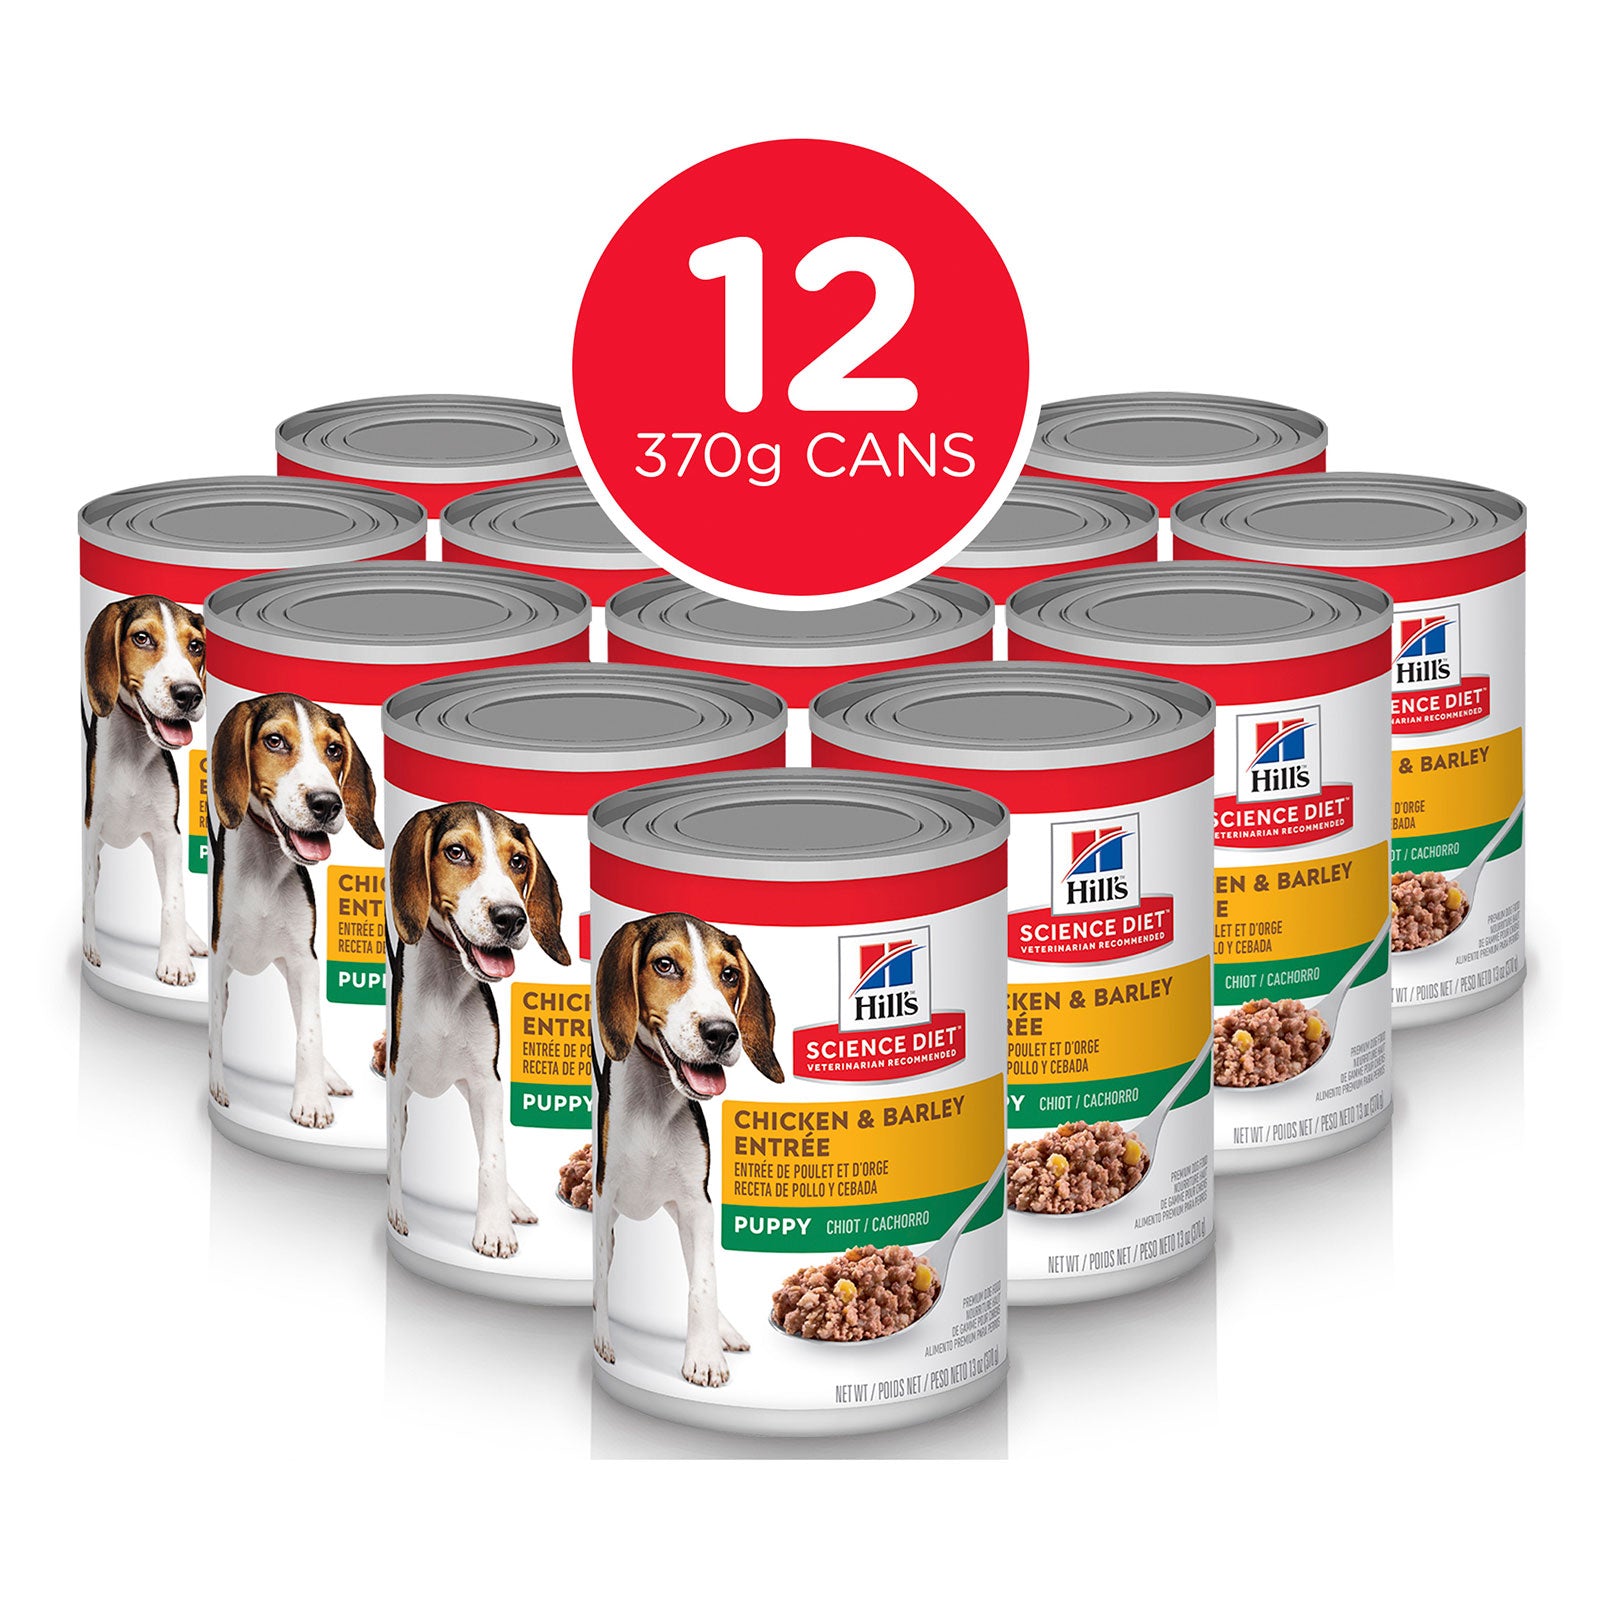 Hill's Science Diet Dog Food Can Puppy Chicken & Barley Entrée